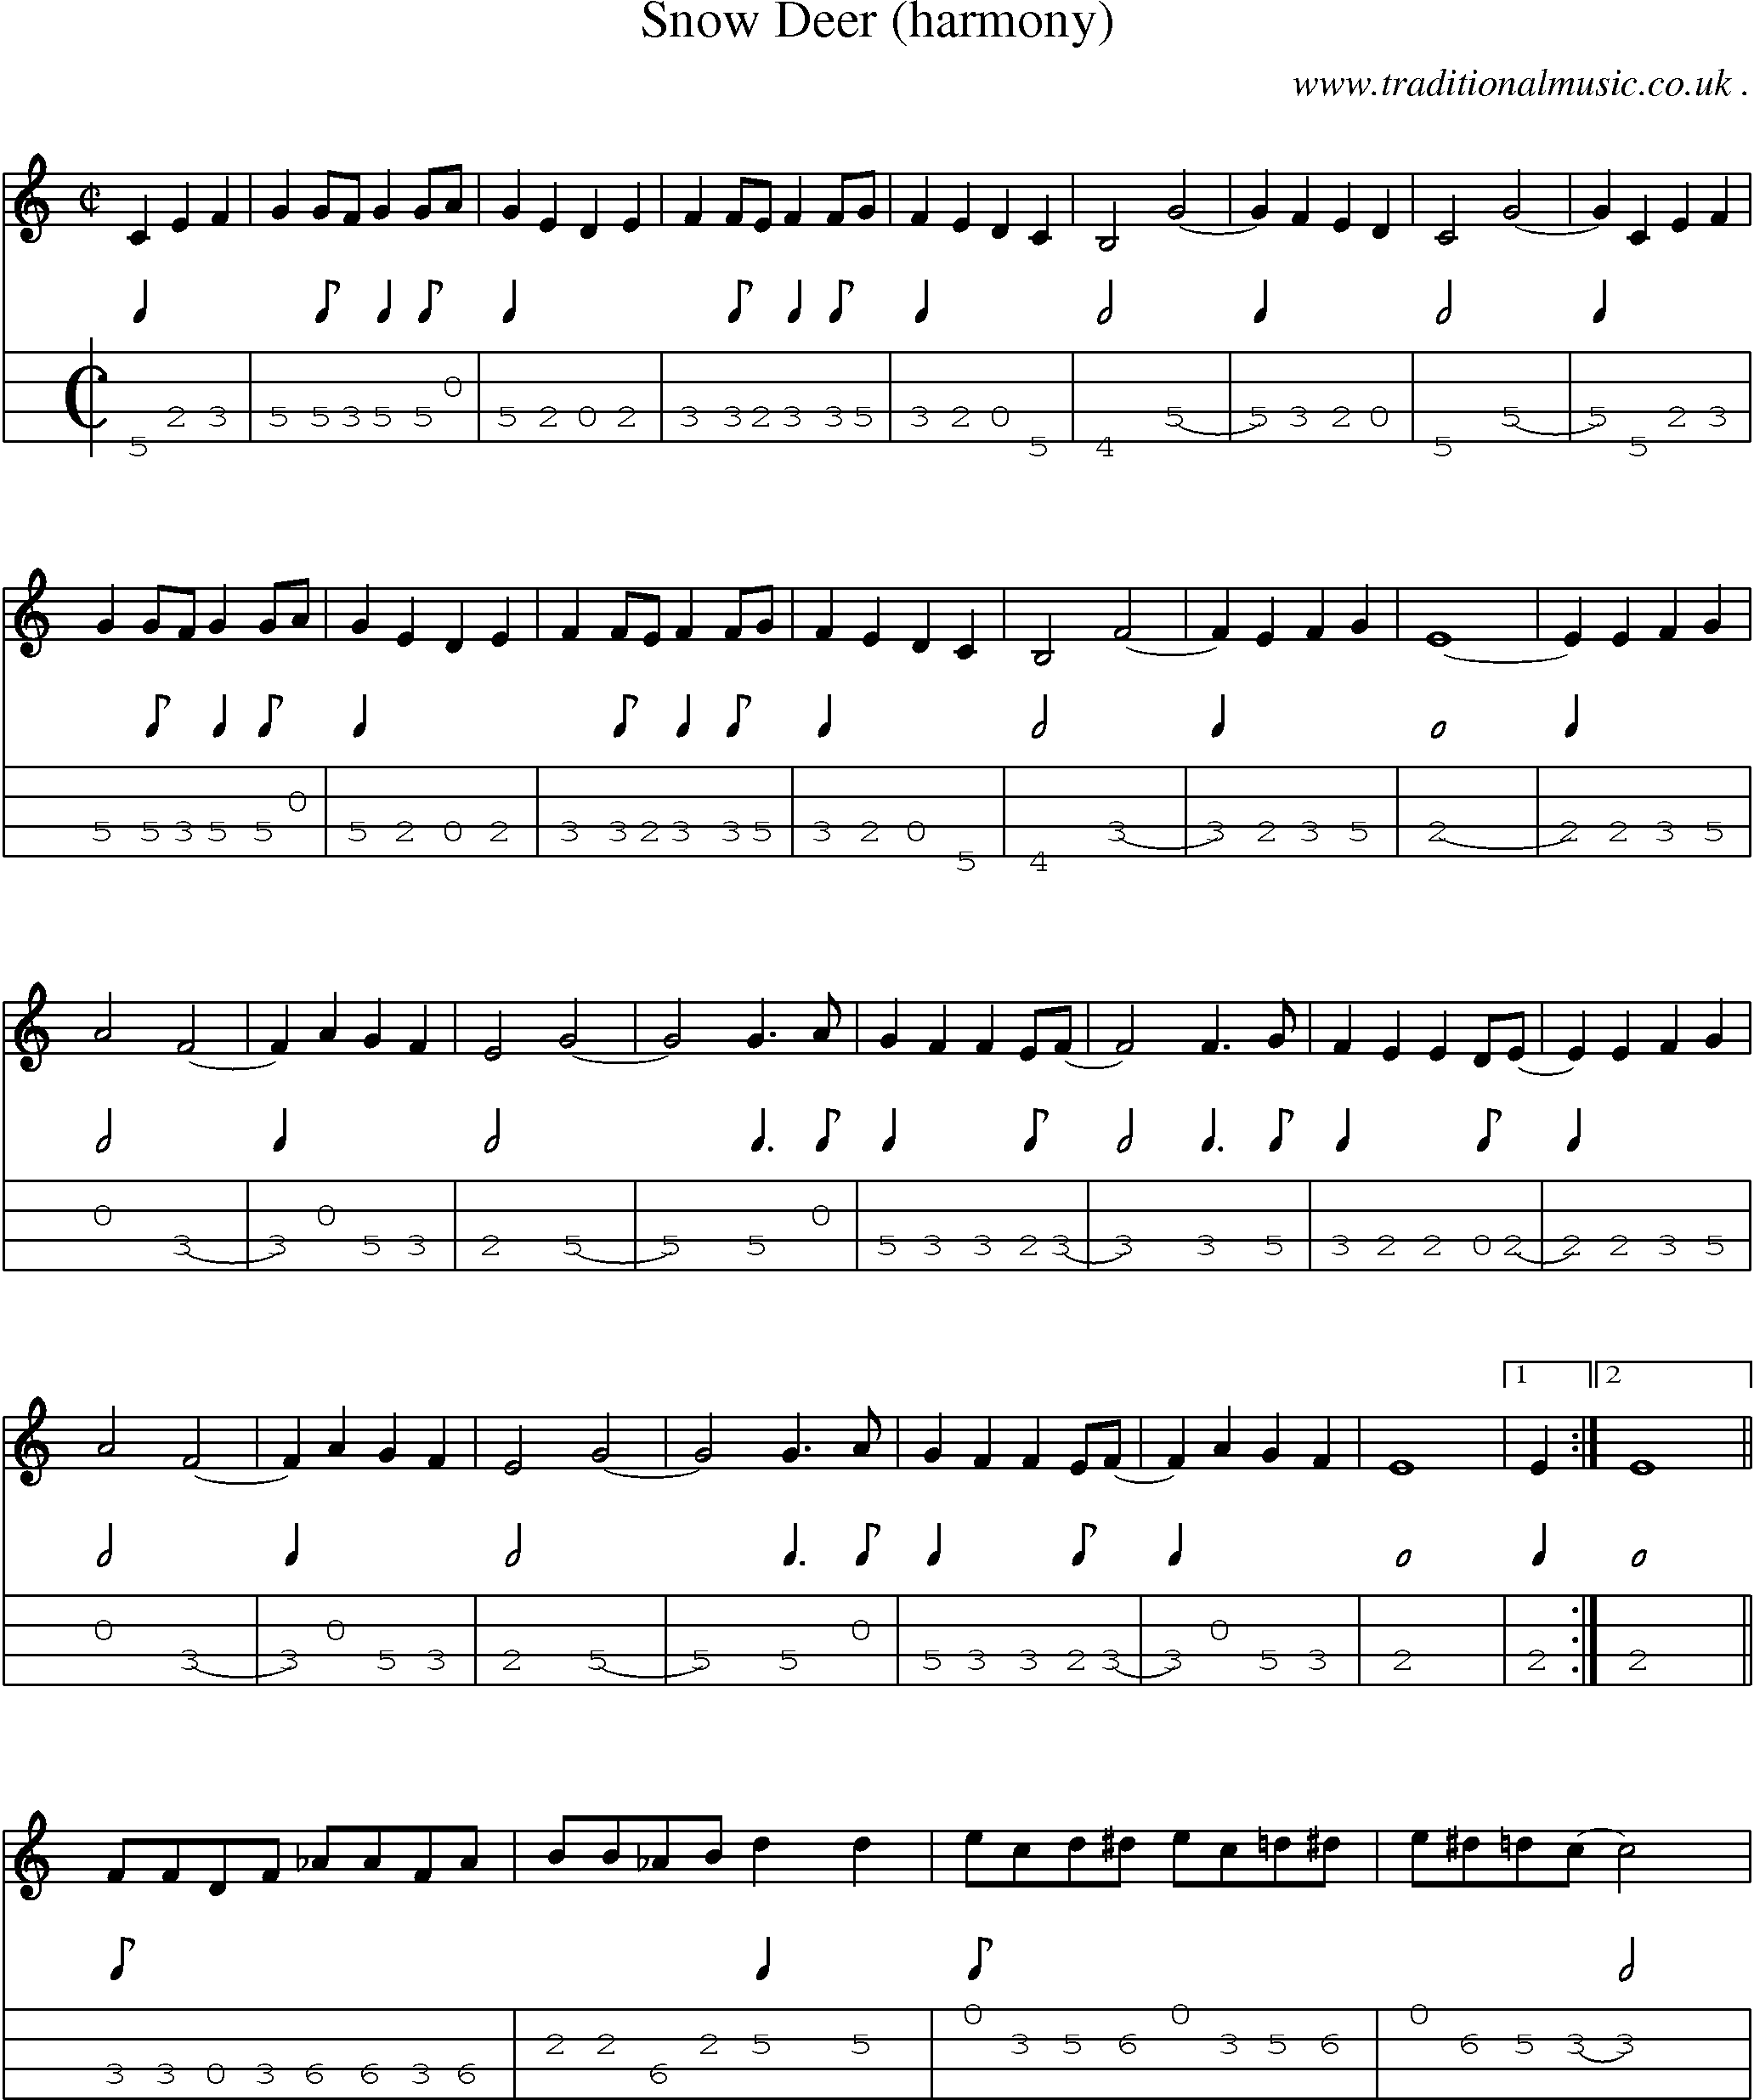 Music Score and Guitar Tabs for Snow Deer (harmony)